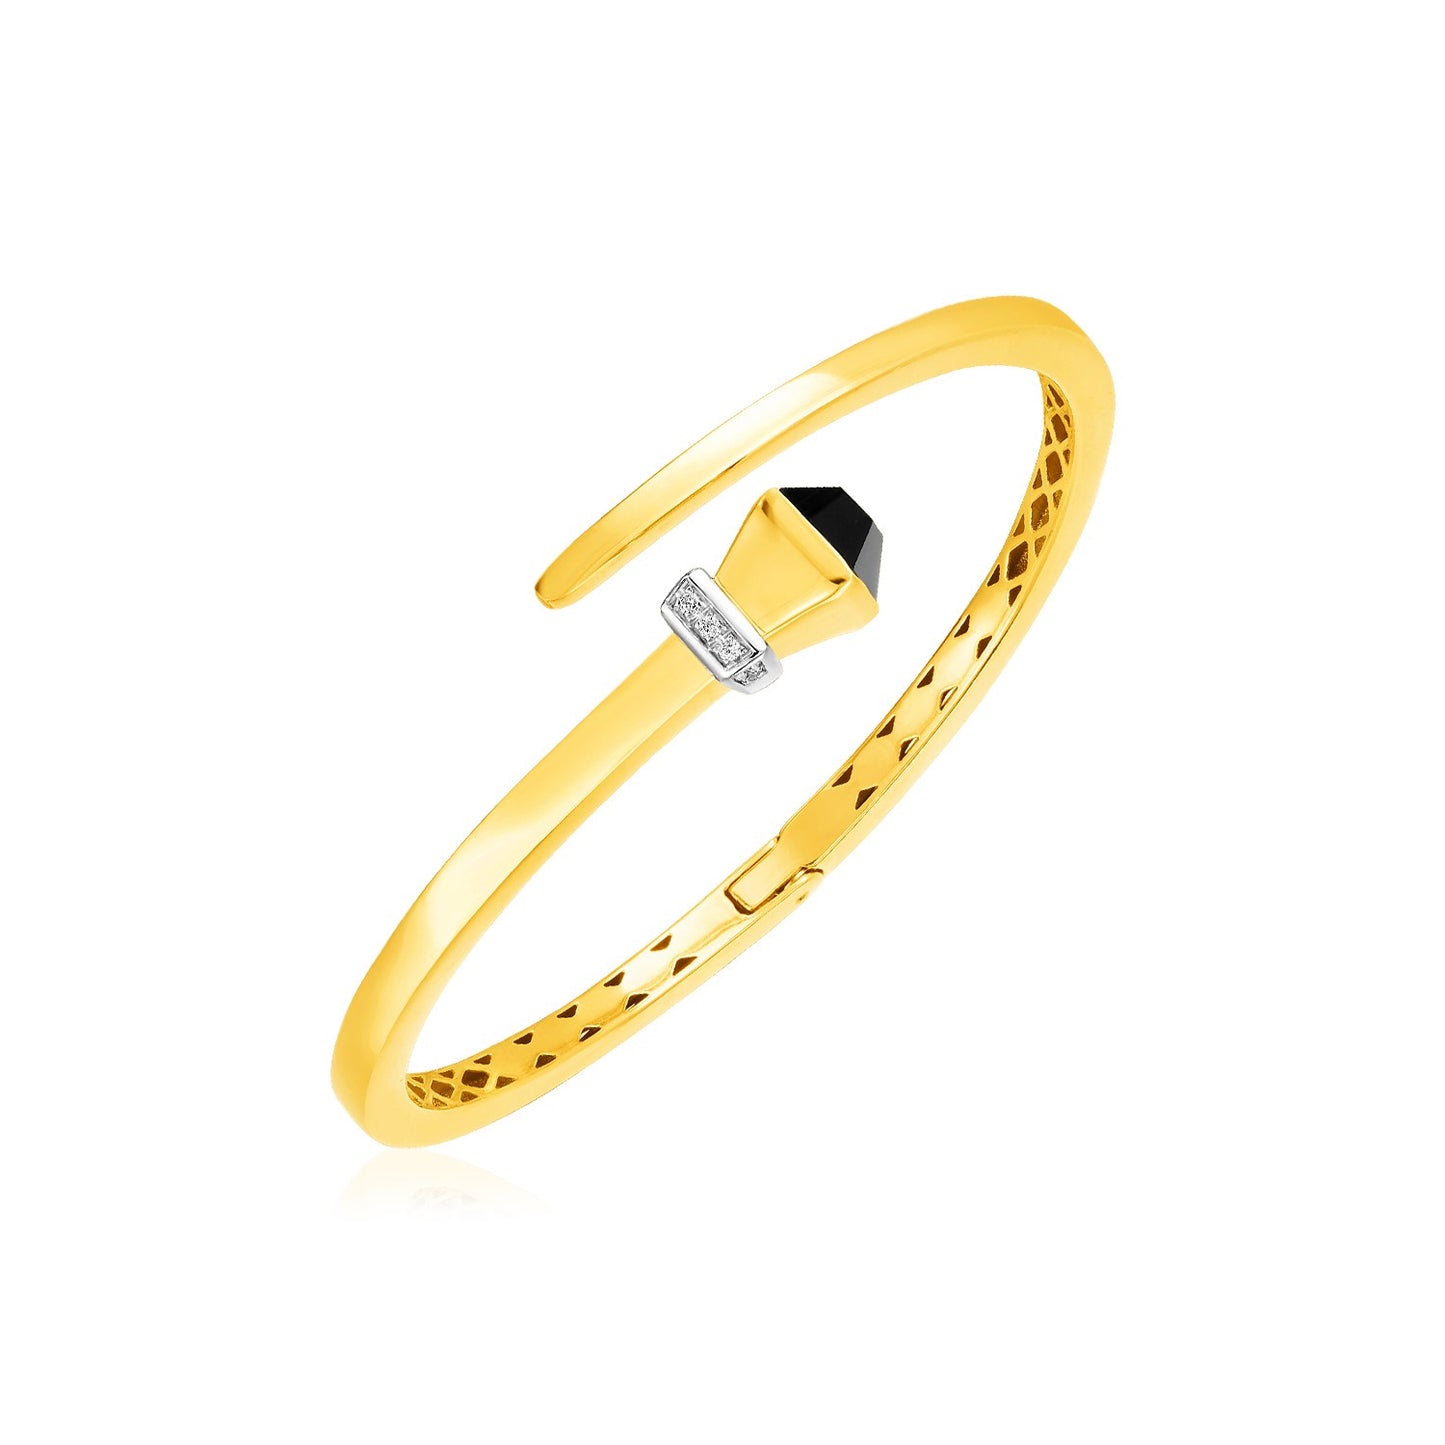 14k Yellow Gold Crossover Style Hinged Bangle Bracelet with Onyx and Diamonds